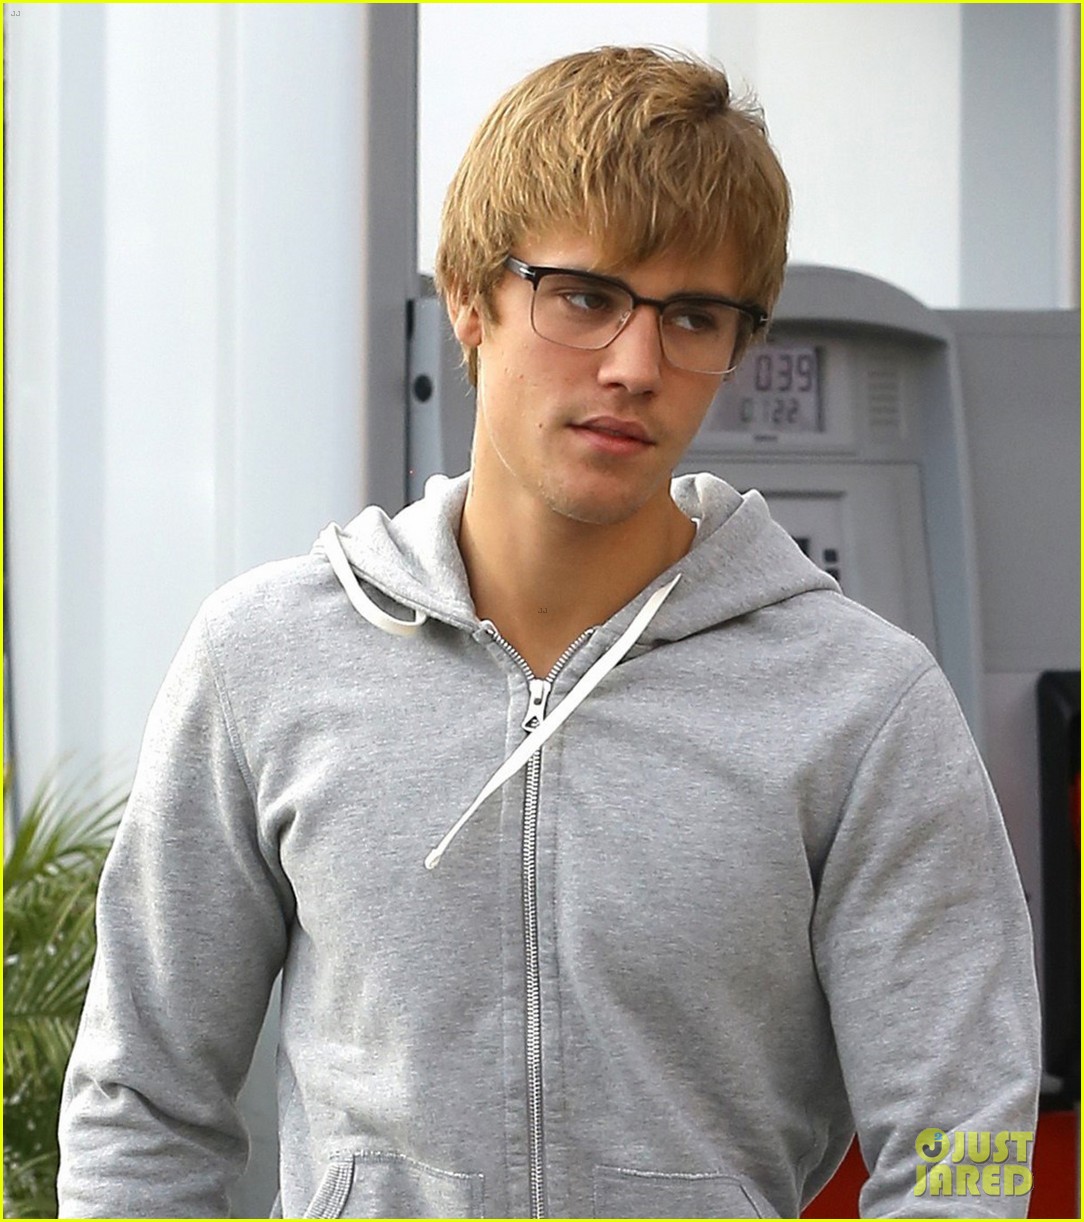 Great Barrier Reef Garderobe Panorama Justin Bieber Gives the Camera a Swooning Stare Behind His Glasses: Photo  3844693 | Justin Bieber Photos | Just Jared: Entertainment News